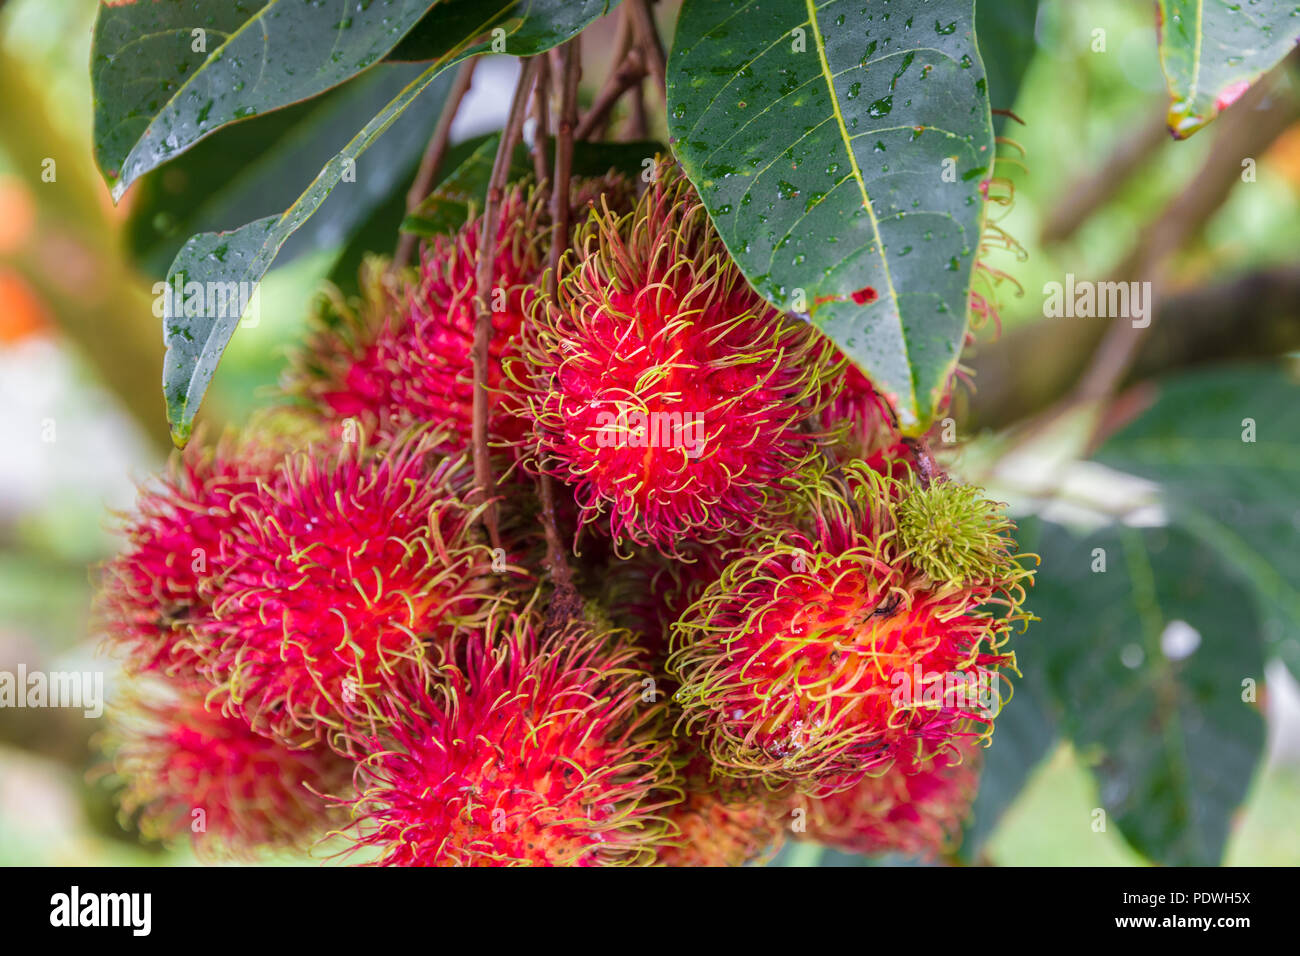 Beautiful closeup of a cluster of organic ripe red rambutan fruits (Nephelium lappaceum) with their hairy protuberances, hanging on a tree in Malaysia. Stock Photo